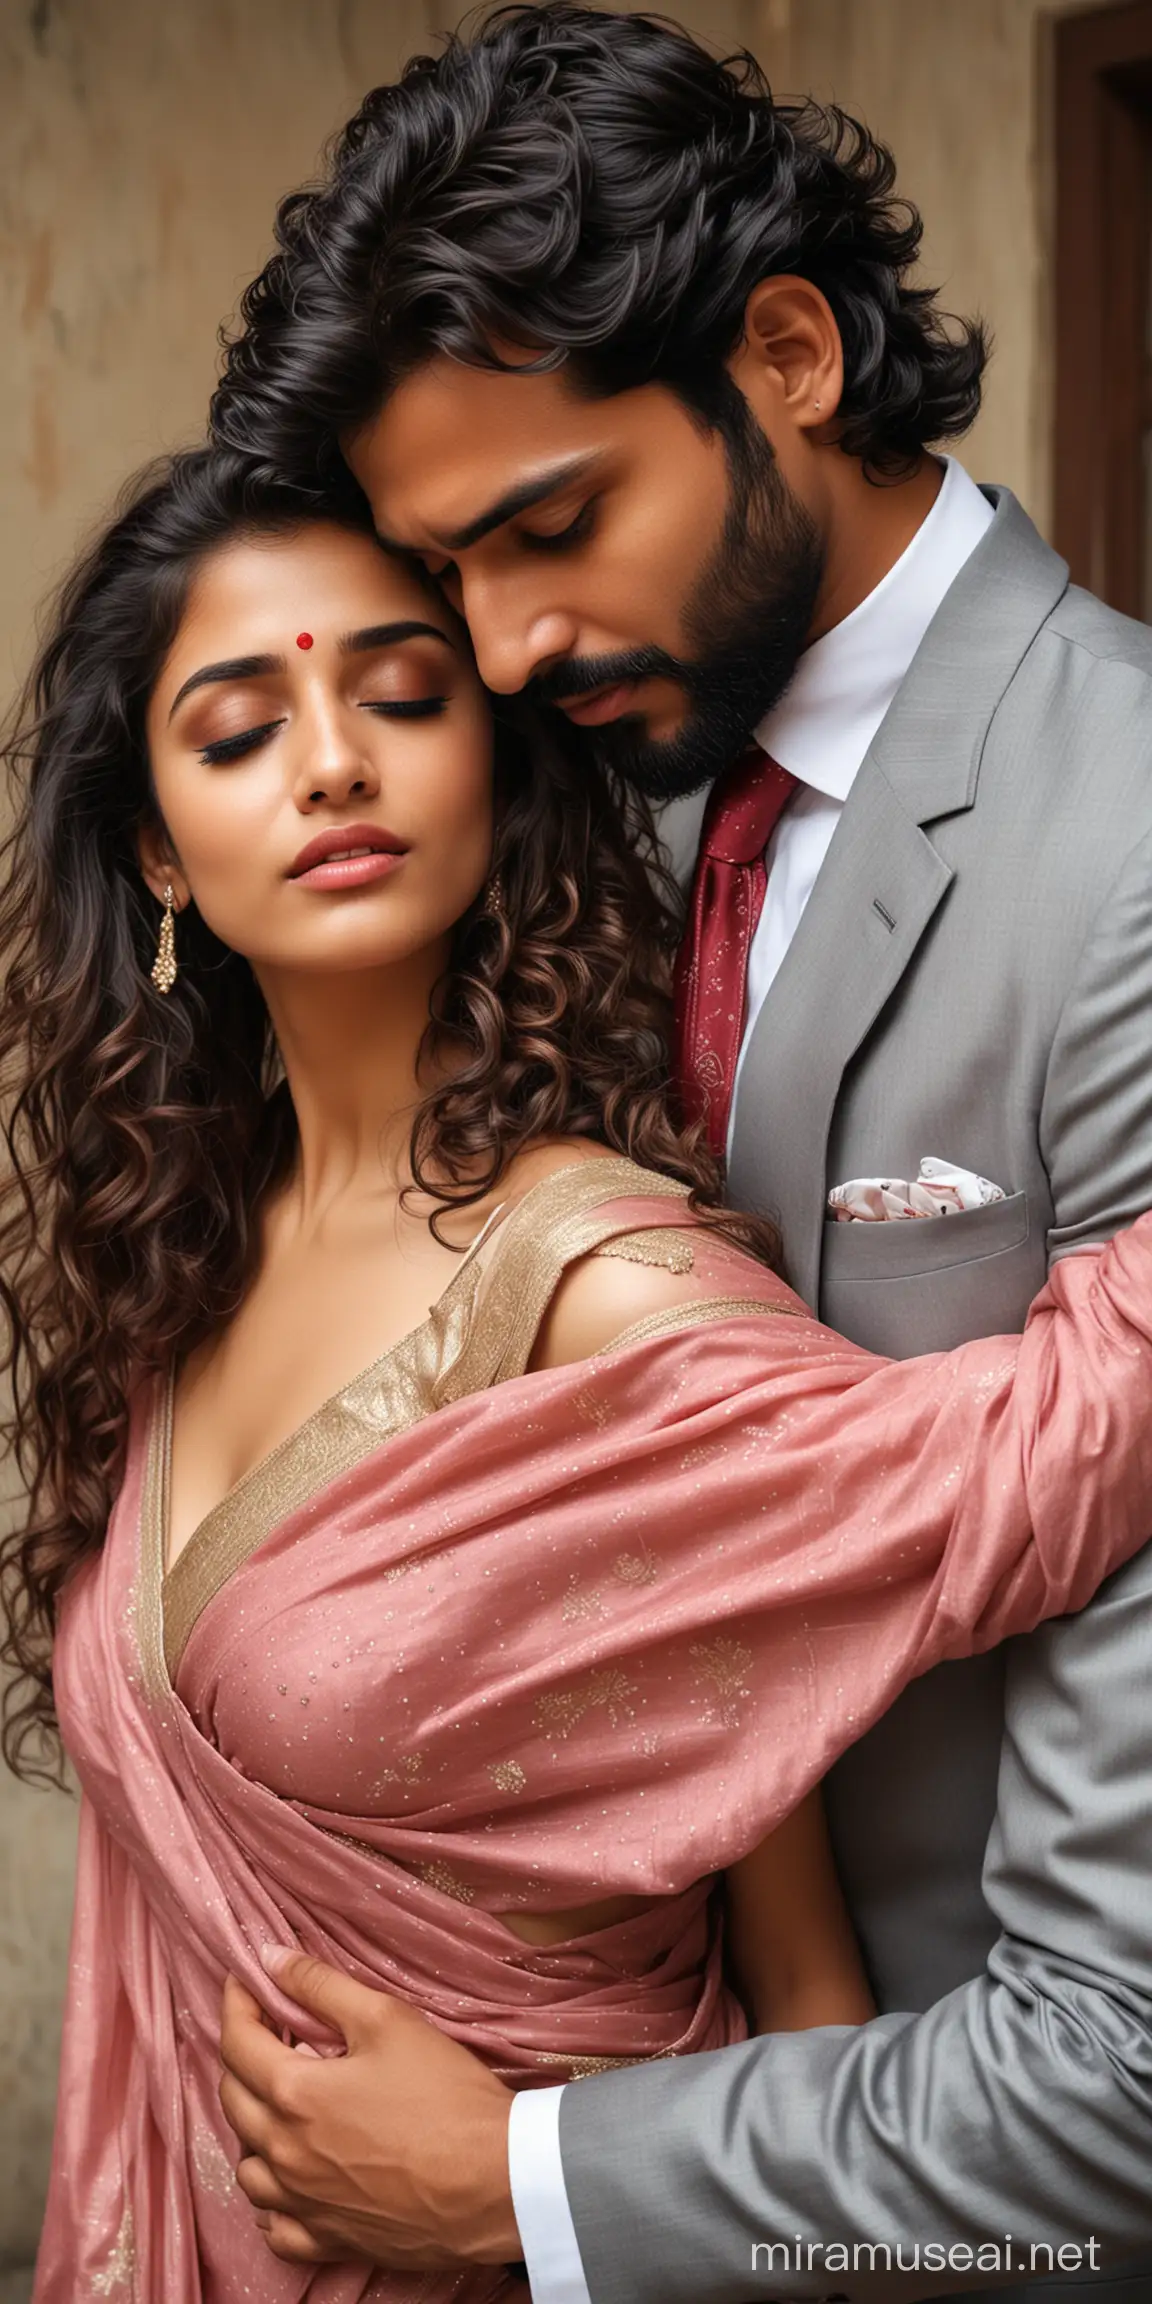 two intimate lovers,   european handsome mAn, most handsome full body photo of indian male,  formals with tie,  elegant and arrogant looks, alfa male, fashionable beard,  most beautiful indian girl, elegant saree look, curly long hair,  head resting on shoulder shoulder  with emotion and crying bursting, weeping  with tears, low cut back, man comforting her holding her back, 
photo realistic, 4k.